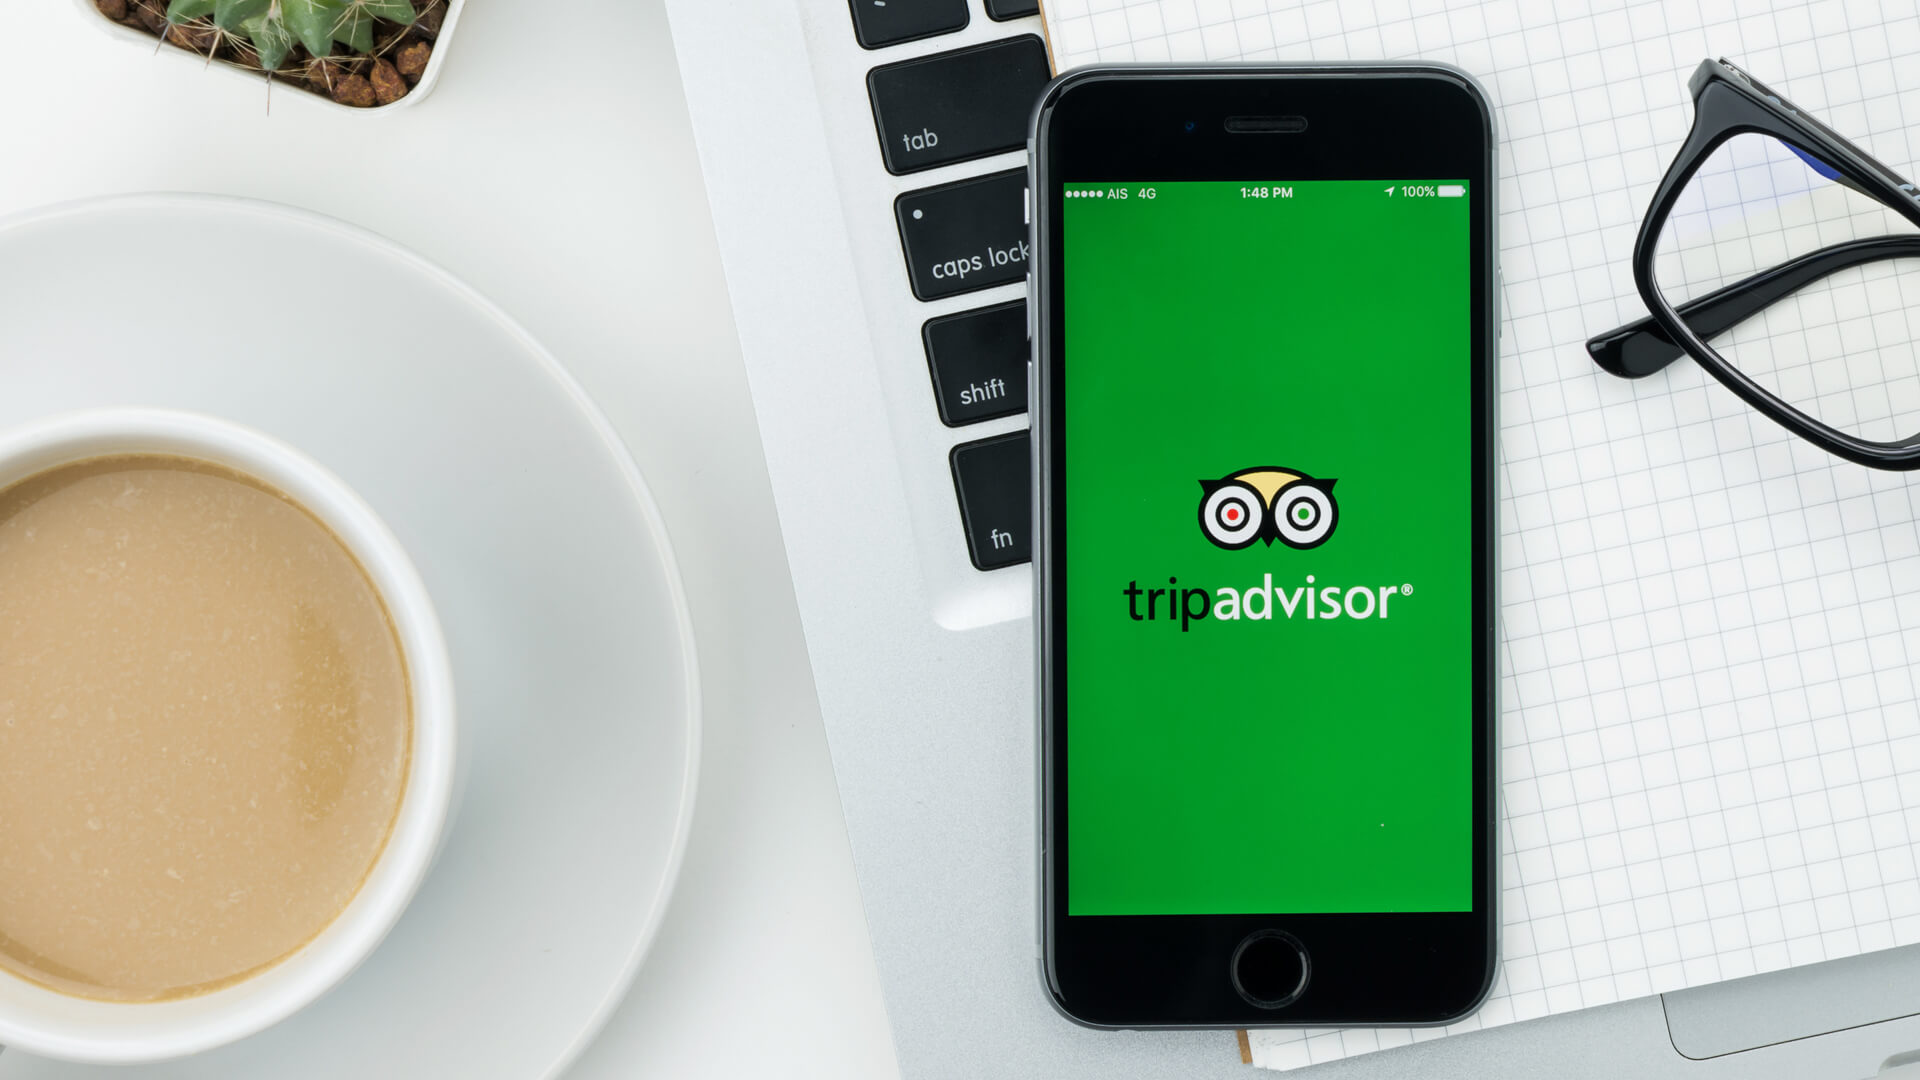 <p>TripAdvisor offers its readers a restaurant guide, which can help locate the fare you desire at a cost you can afford. In addition, you can read the latest reviews of each dining spot to help you decide if it’s worth your time to visit.</p>